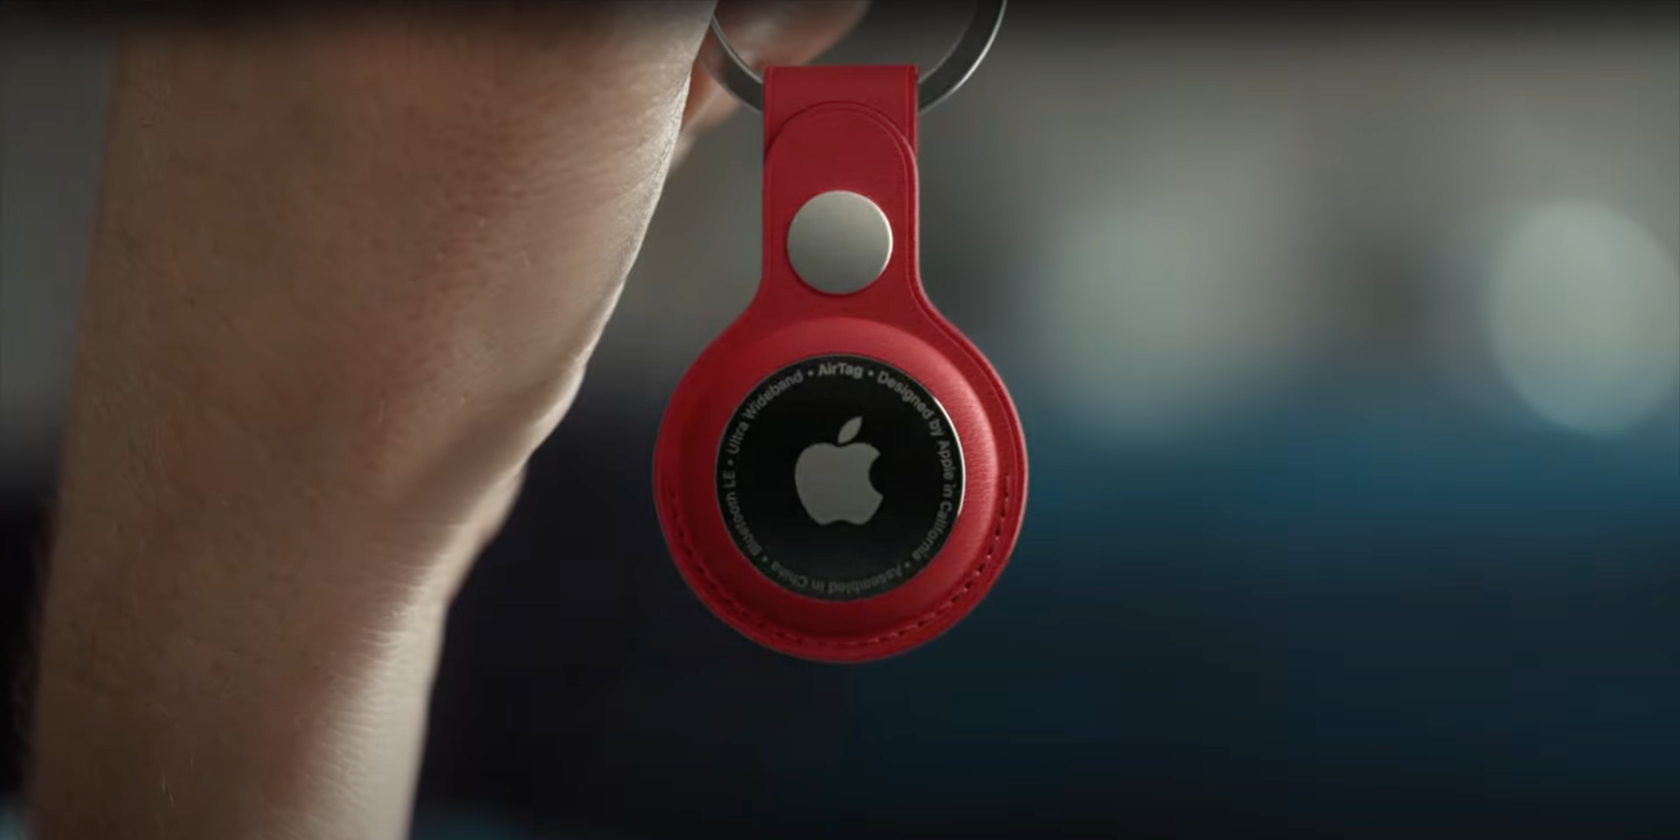 A still from Apple's ad for the AirTag item tracker showing a hand holding a keychain with an AirTag attached to it